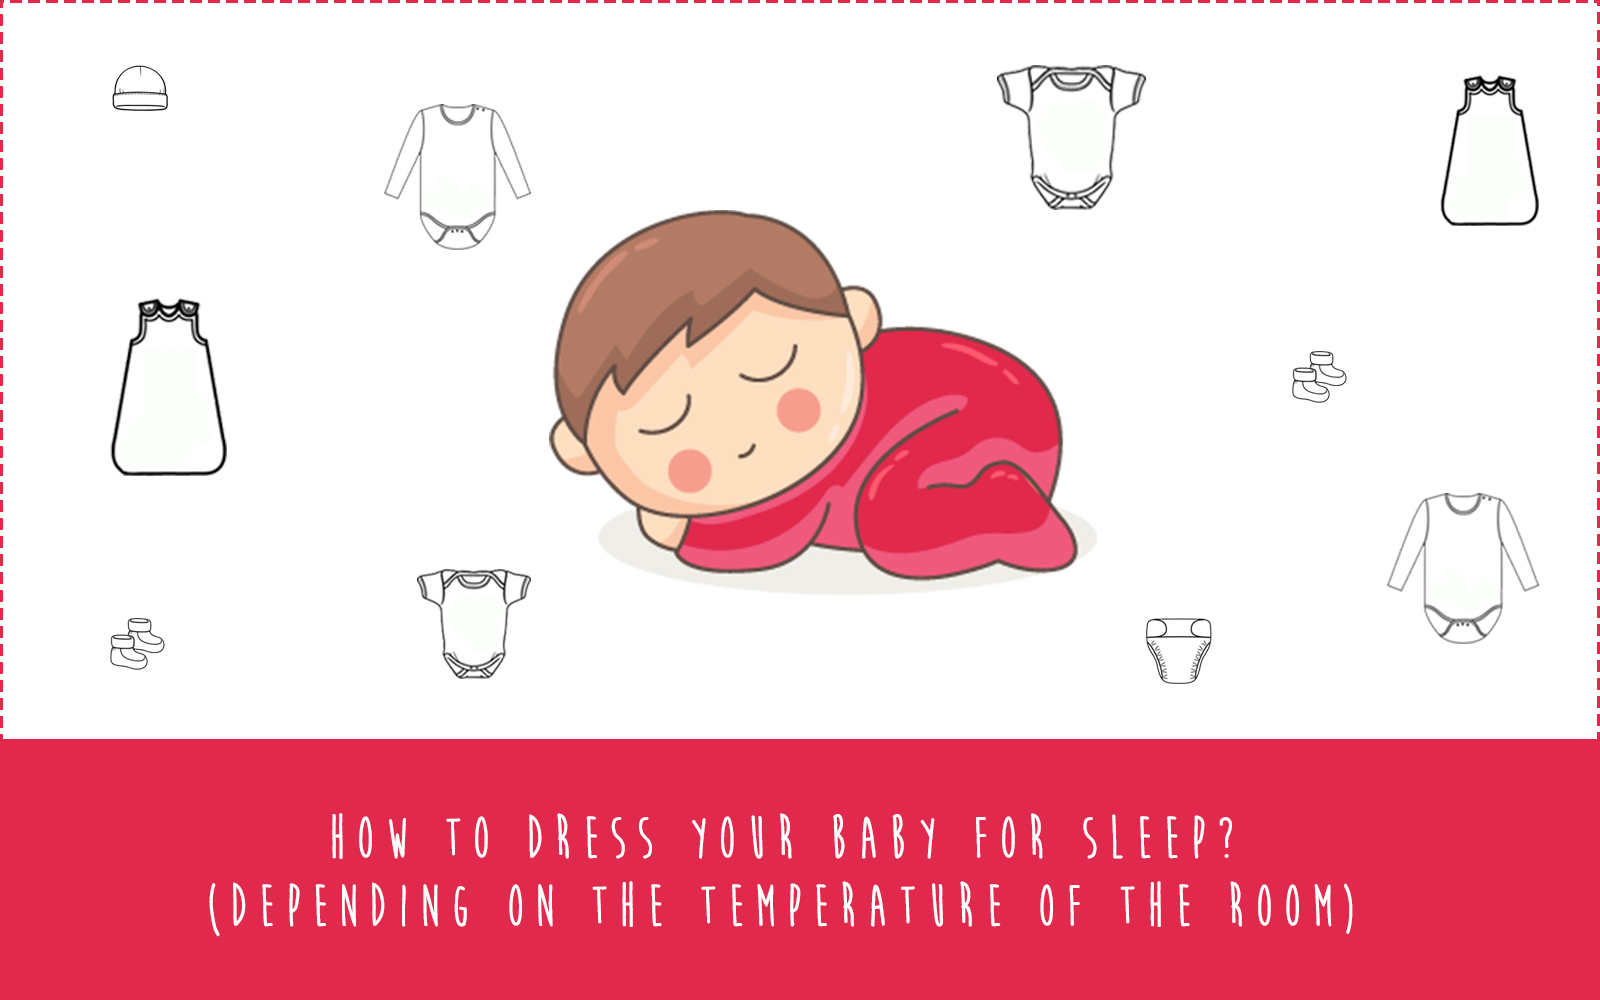 What is a TOG Value? How Should I Dress my Baby for Sleep?